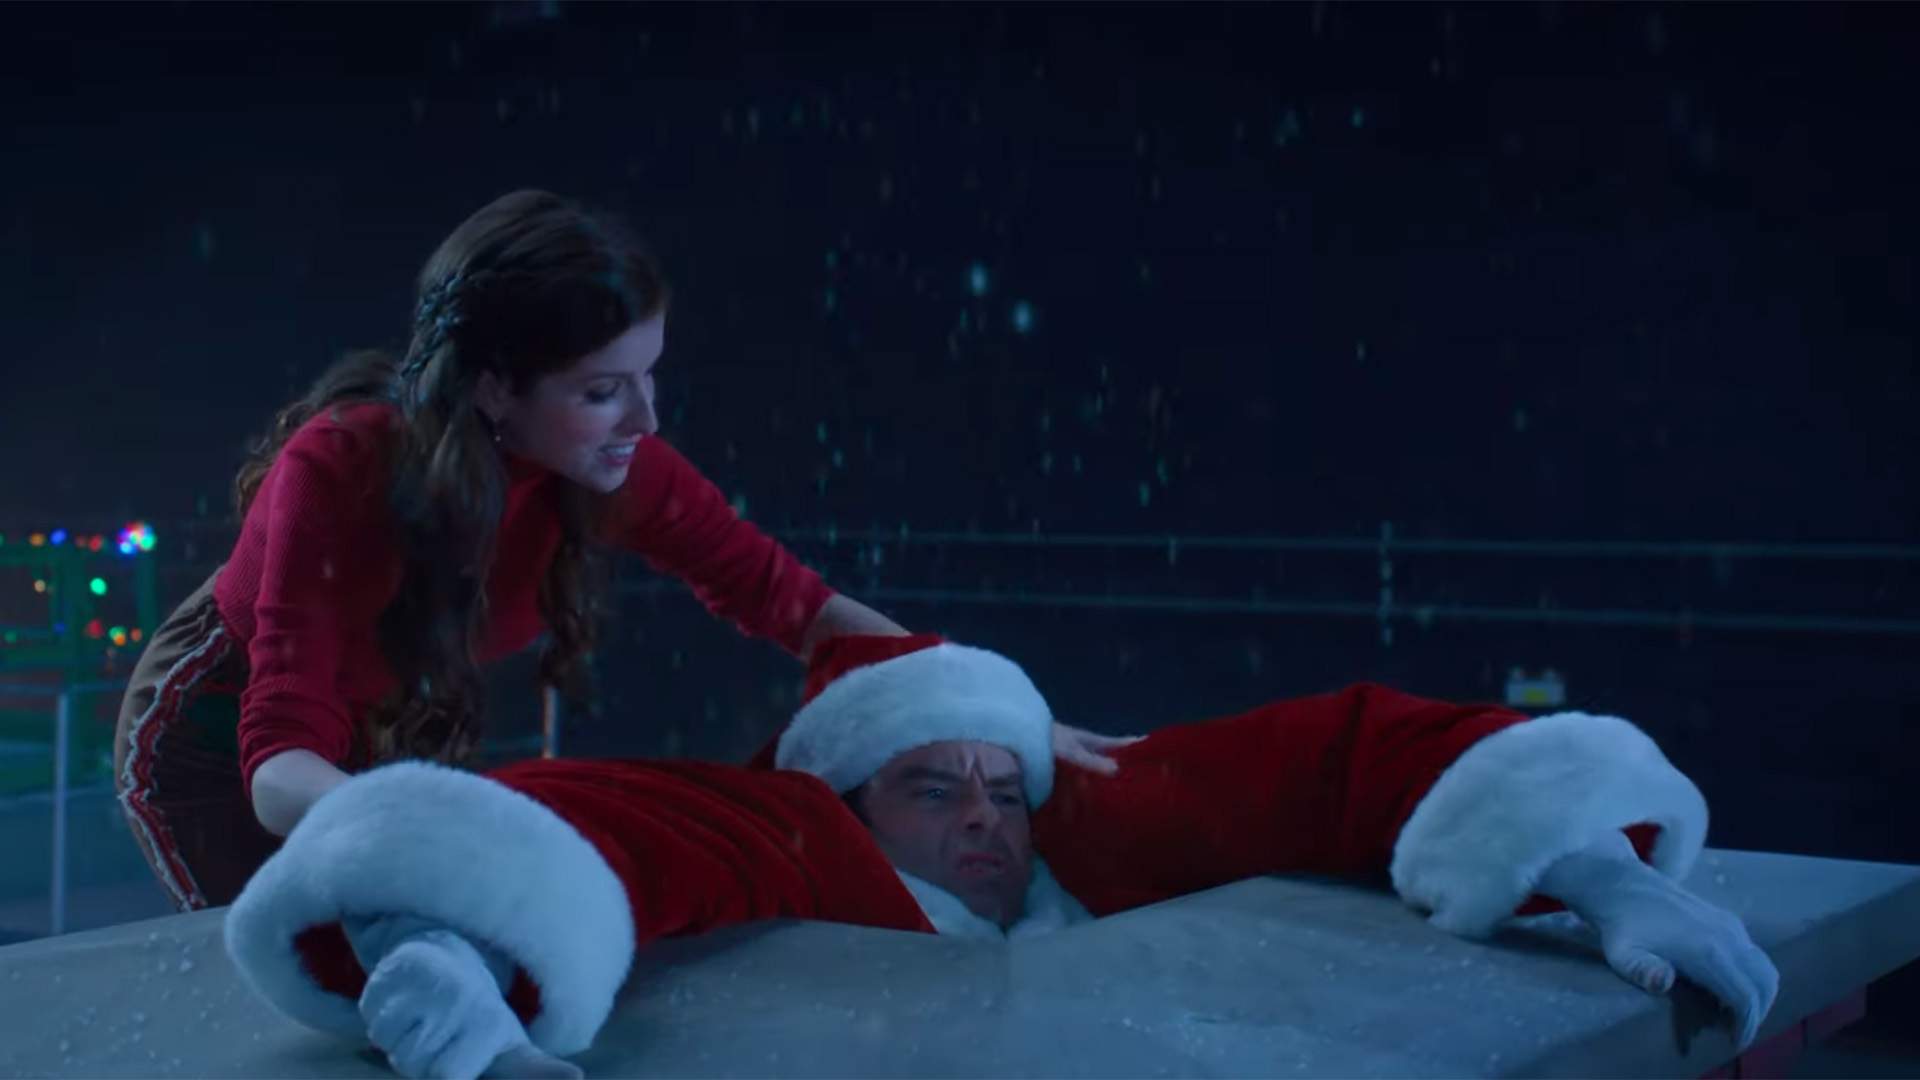 Anna Kendrick Is Here to Save Christmas In the Trailer for Disney's New Festive Comedy 'Noelle'